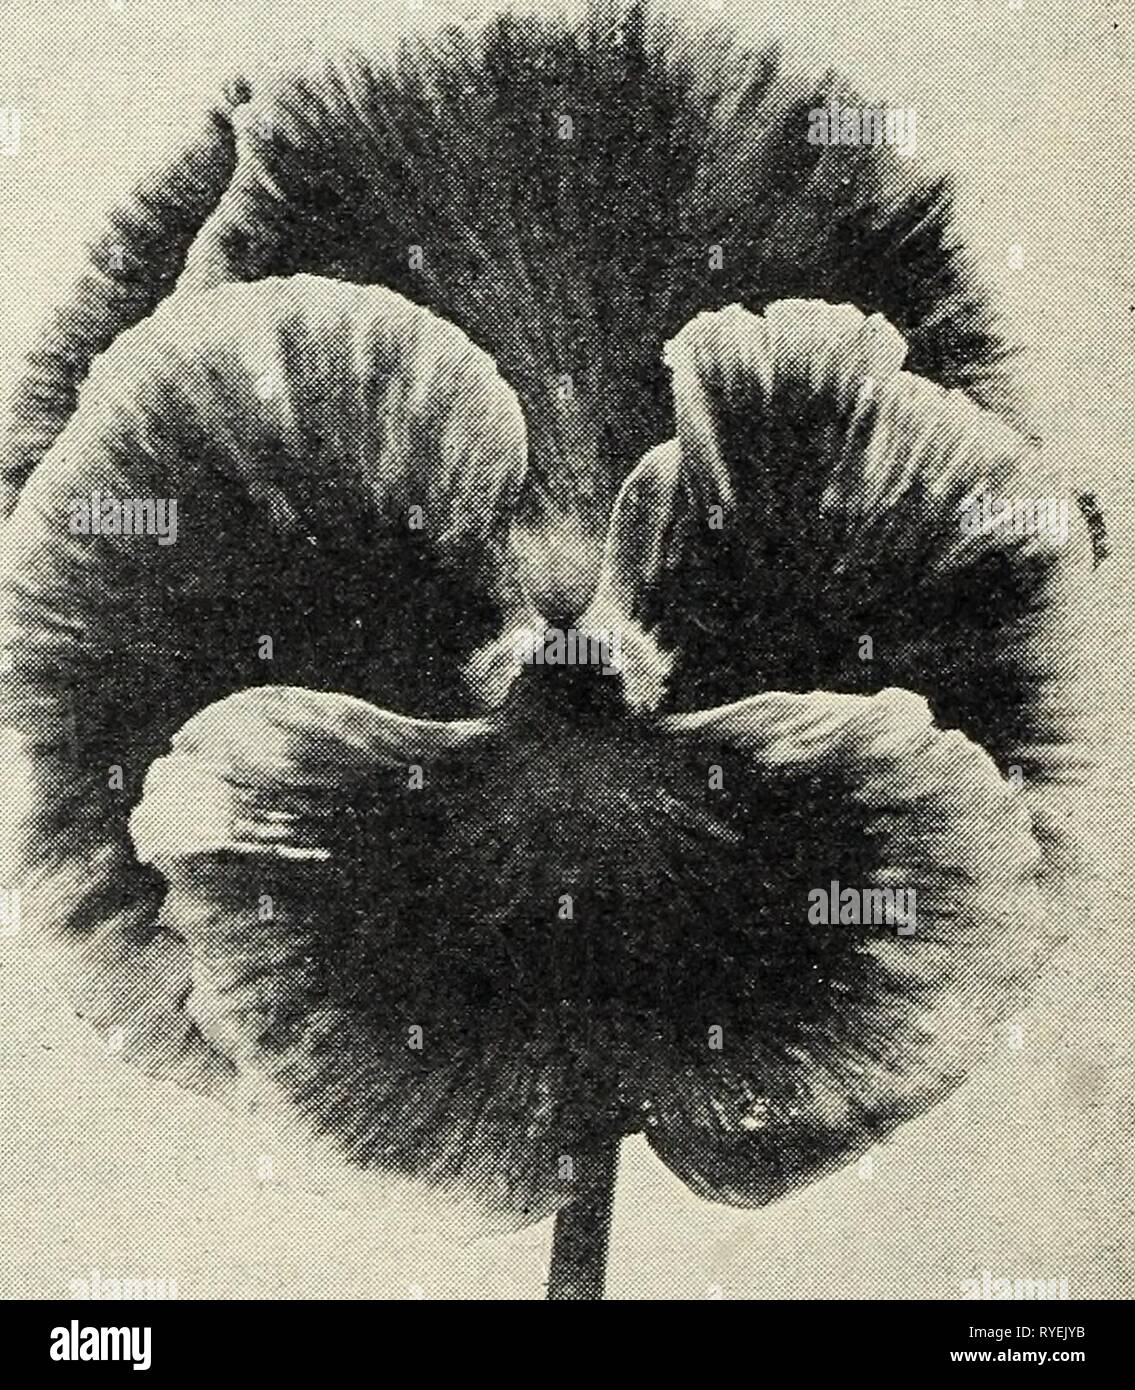 Dutch bulbs for spring blooming  dutchbulbsforspr1928wwba Year: 1928  22 Florists' Price List — Fall 1928 — The W. W. Barnard Co., 3942 S. Federal St., Chicago SEEDS OF SPECIAL MERIT—Continued For a Complete List of FLOWER SEEDS — See Pages 24 to 35 GYPSOPHILA GRANDIFLORA ELEGANS ALBA. 'Paris Market*' Strain. This is a great improvement over the old variety, grows about the same height but has larger pure white flowers. Many acres are grown for the Paris Market. T. pkt., 10c; oz., 20c; lb., $1.65 LARKSPUR LA FRANCE. The best pink stock-flowered Lark- spur for Florists' use. The large, well for Stock Photo